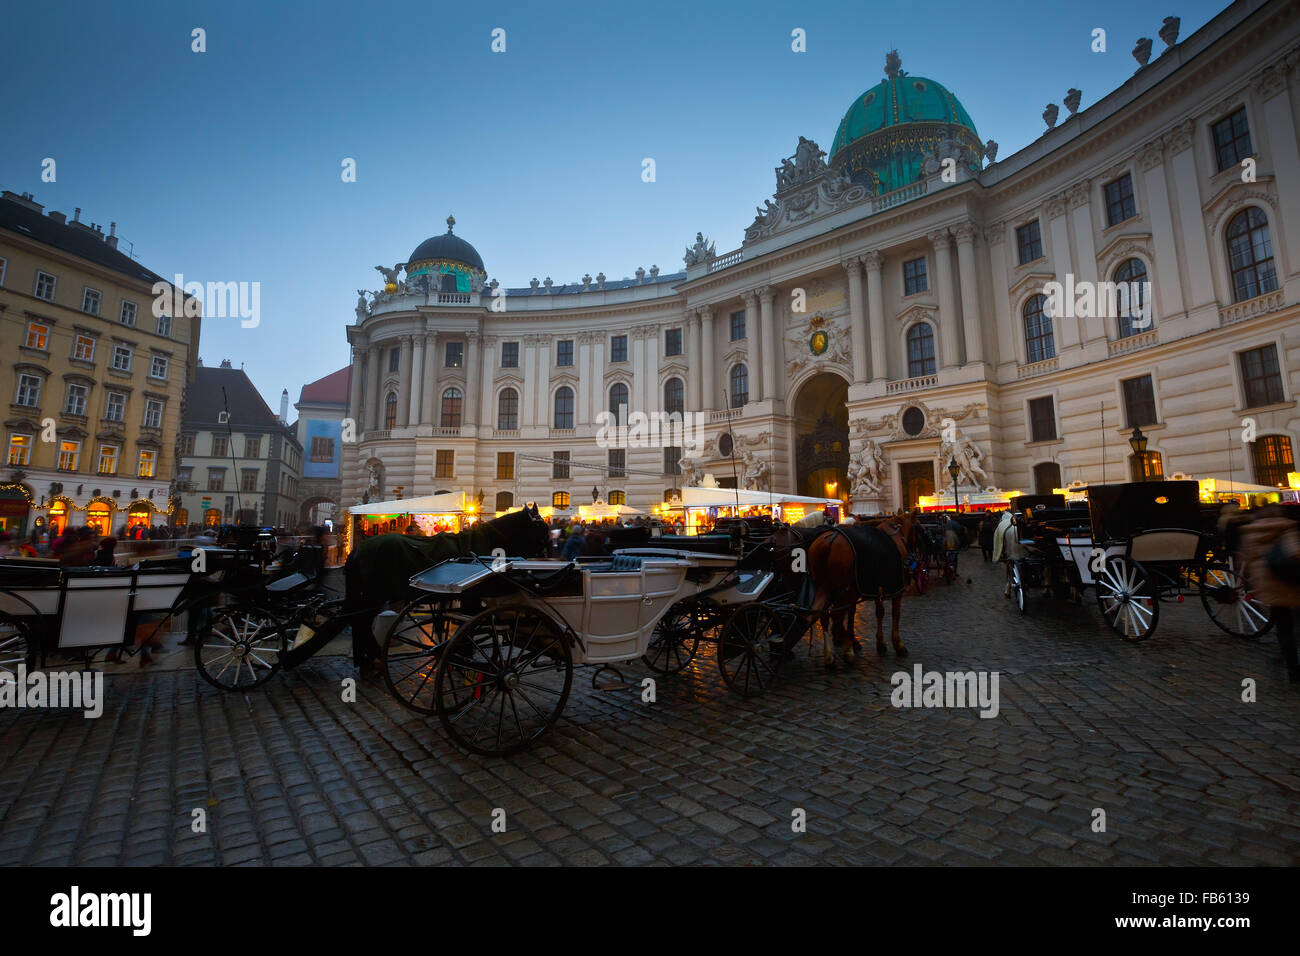 Carriages in front of the Hofburg palace in Vienna. Stock Photo